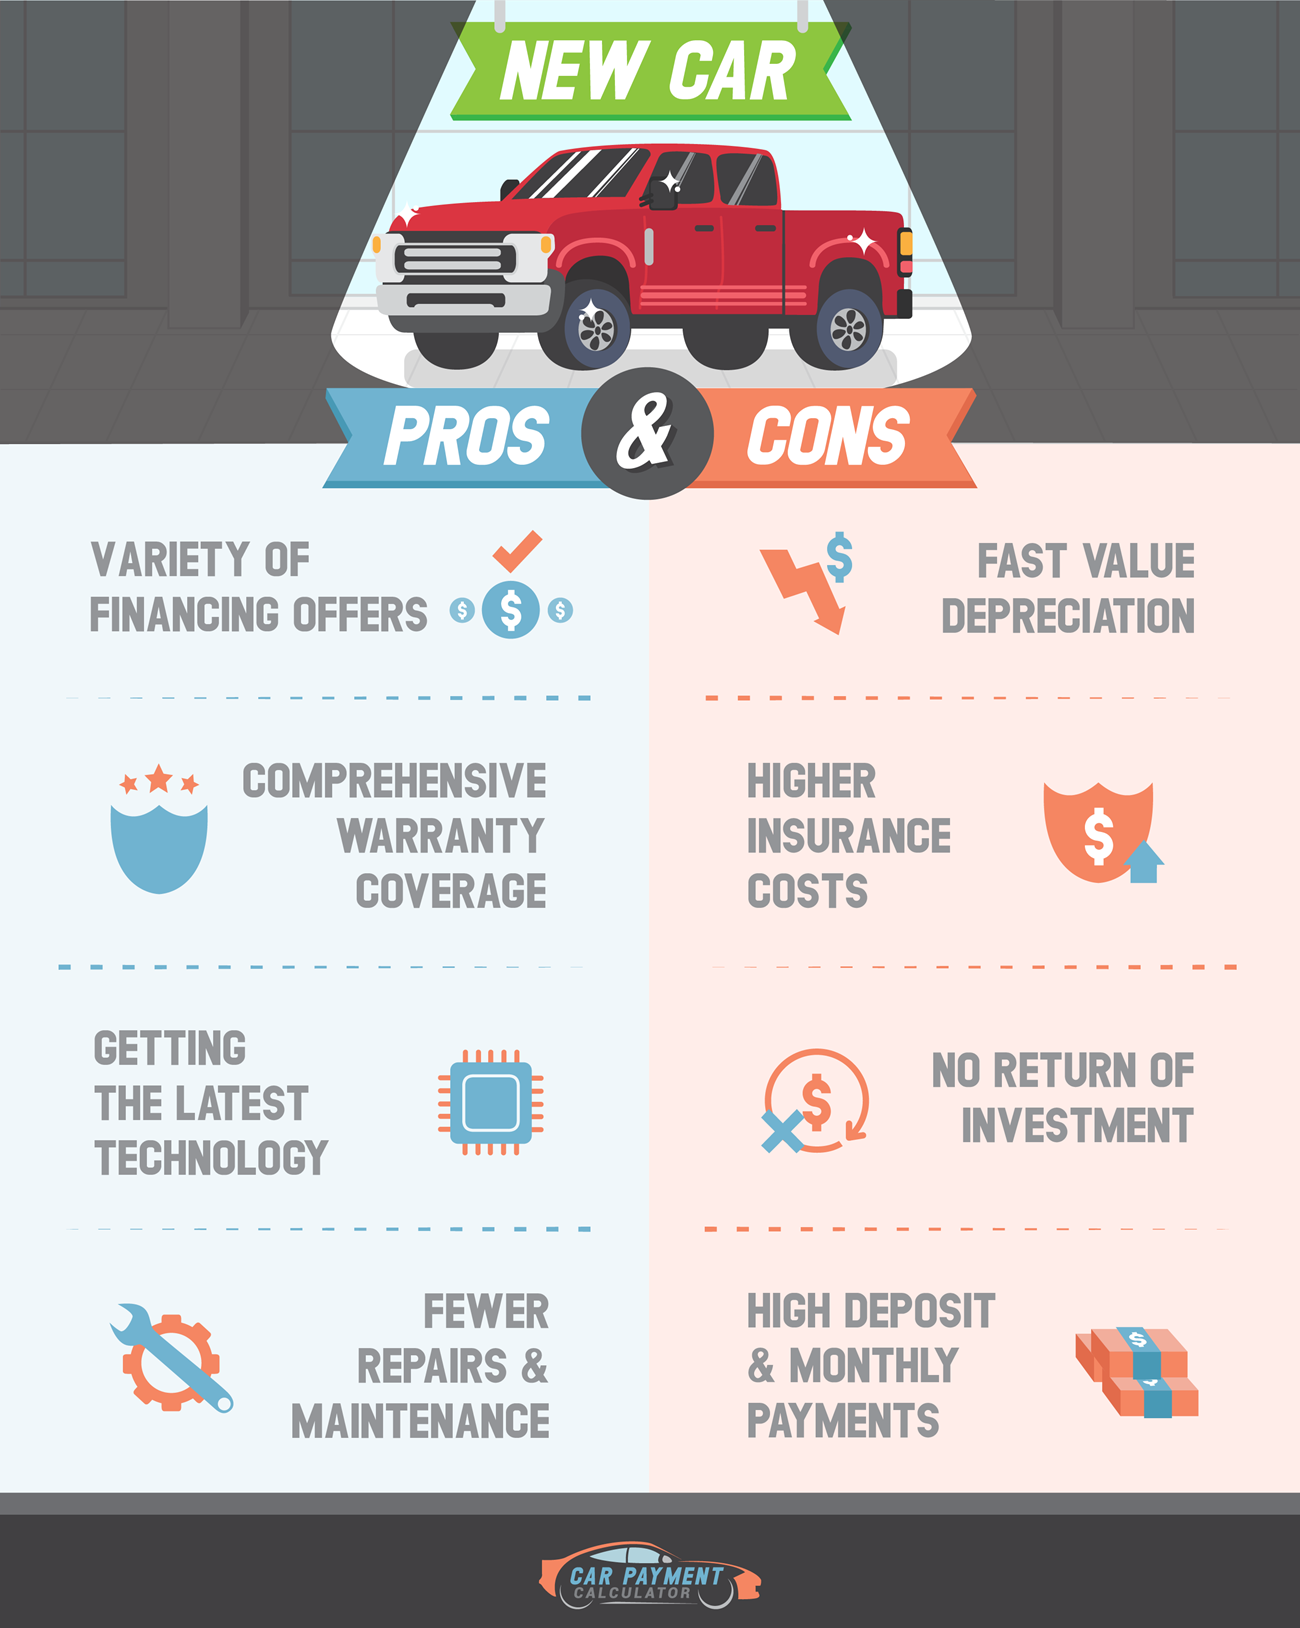 Pros and Cons of Buying a New Vehicle.